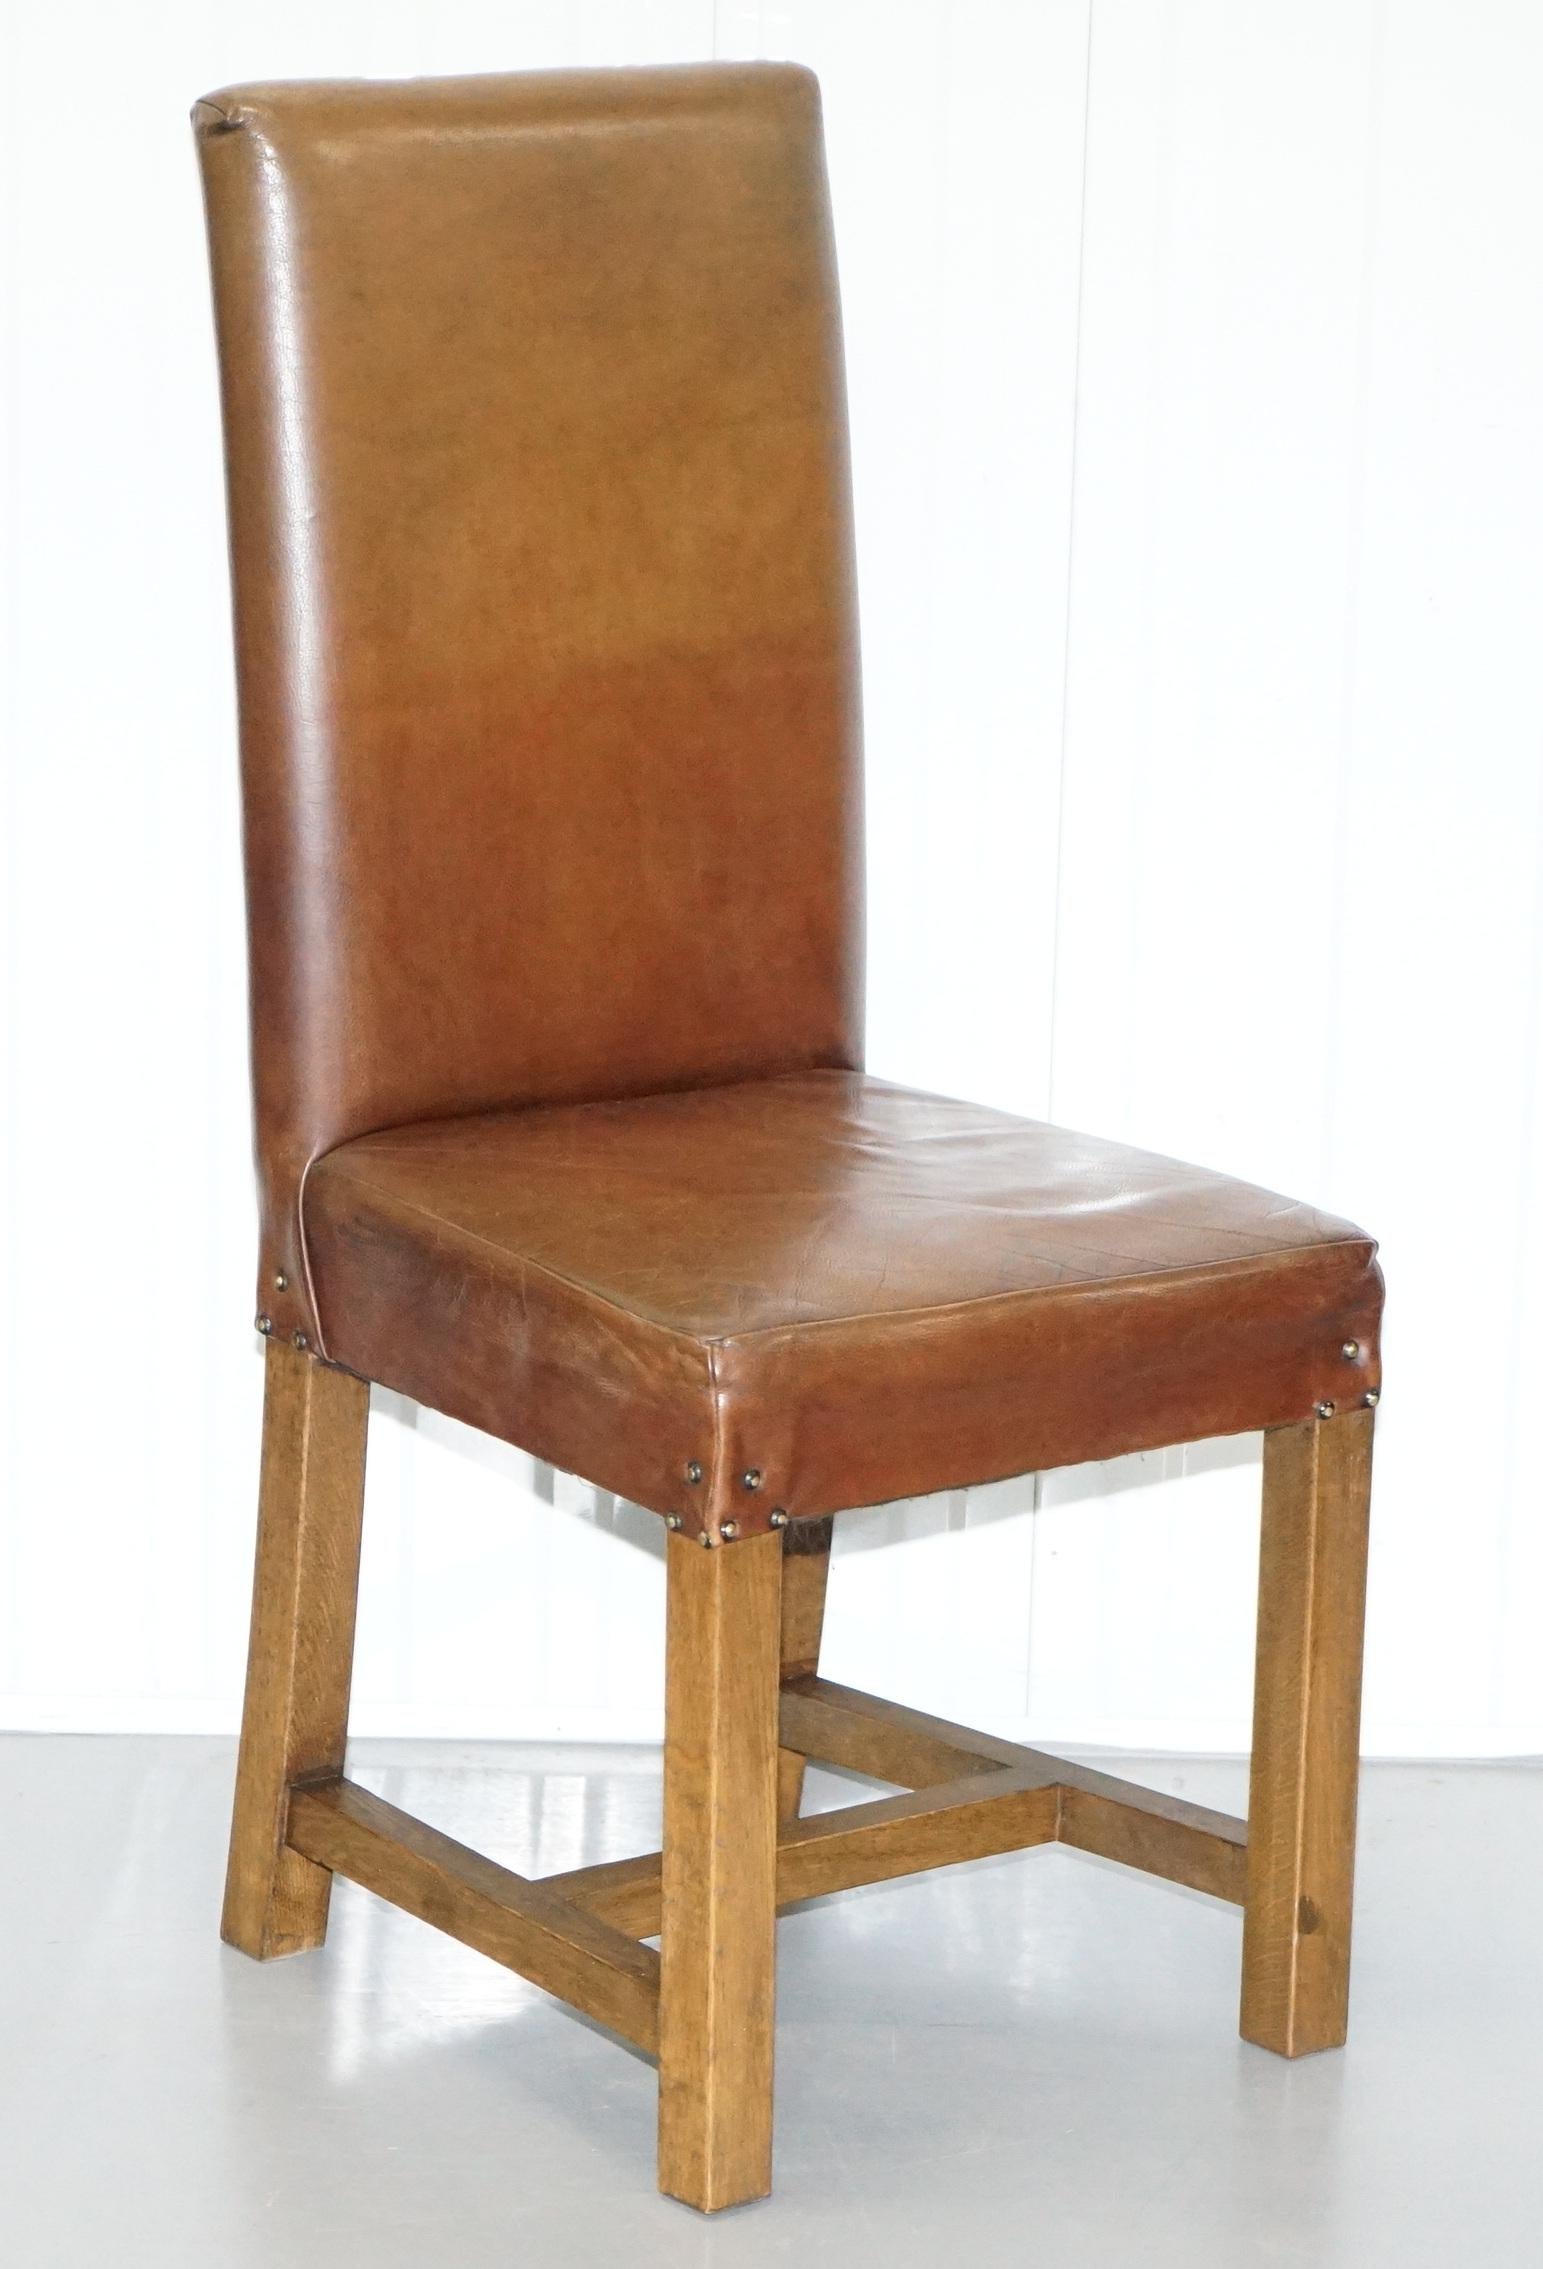 We are delighted to offer for sale this stunning set of 8 Halo Soho heritage brow leather high back dining chairs RRP £3,832

A very good looking well made and comfortable set of high back dining chairs, the leather it aged heritage brown leather